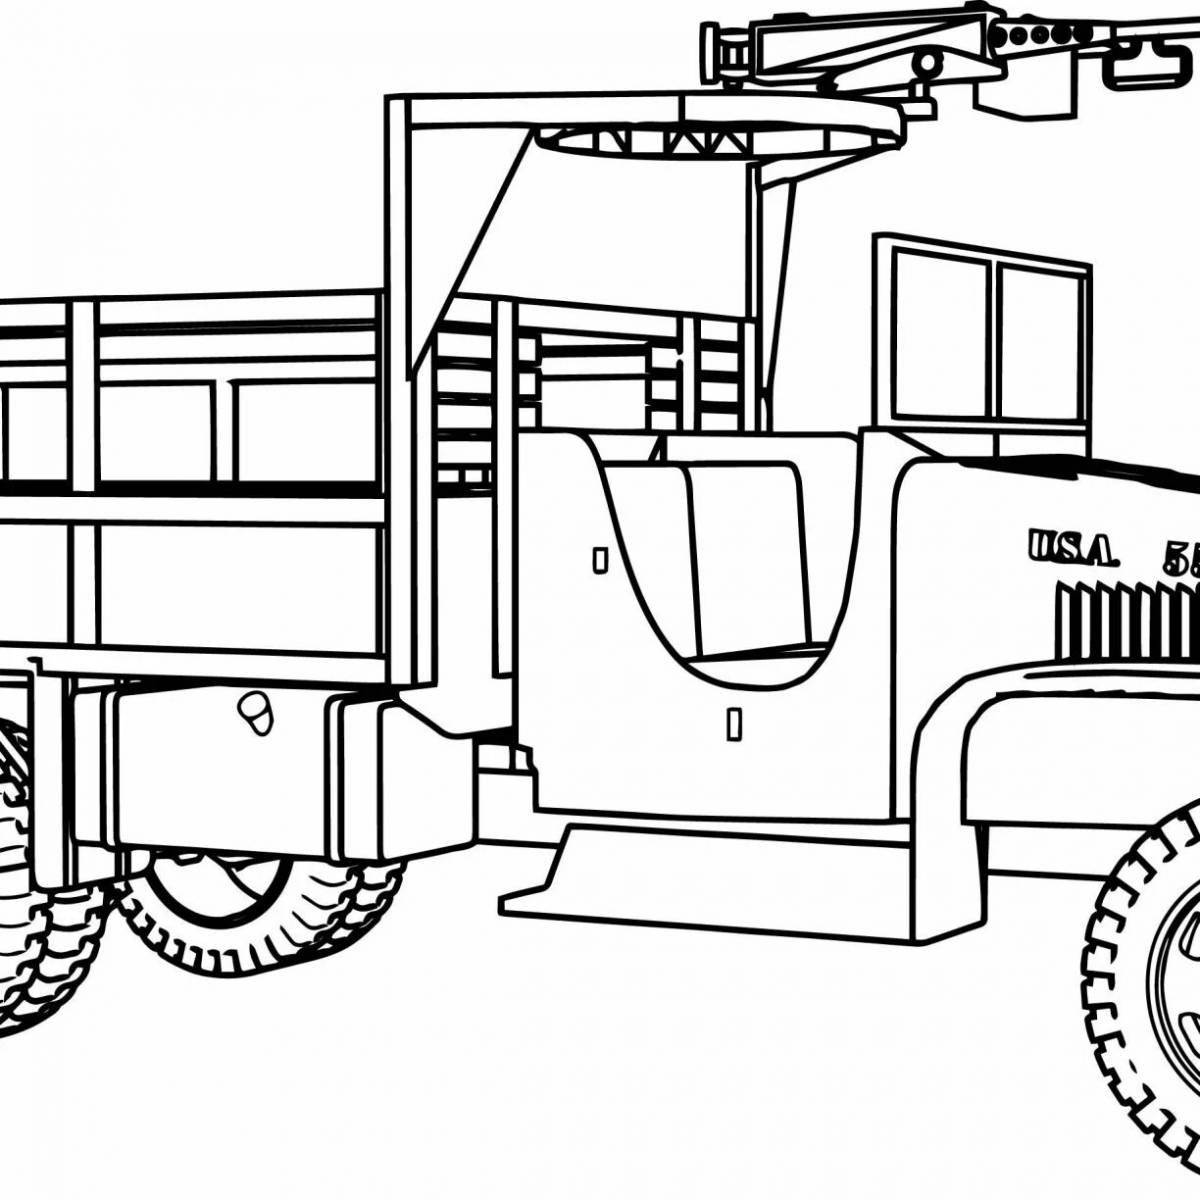 Coloring big military truck for kids